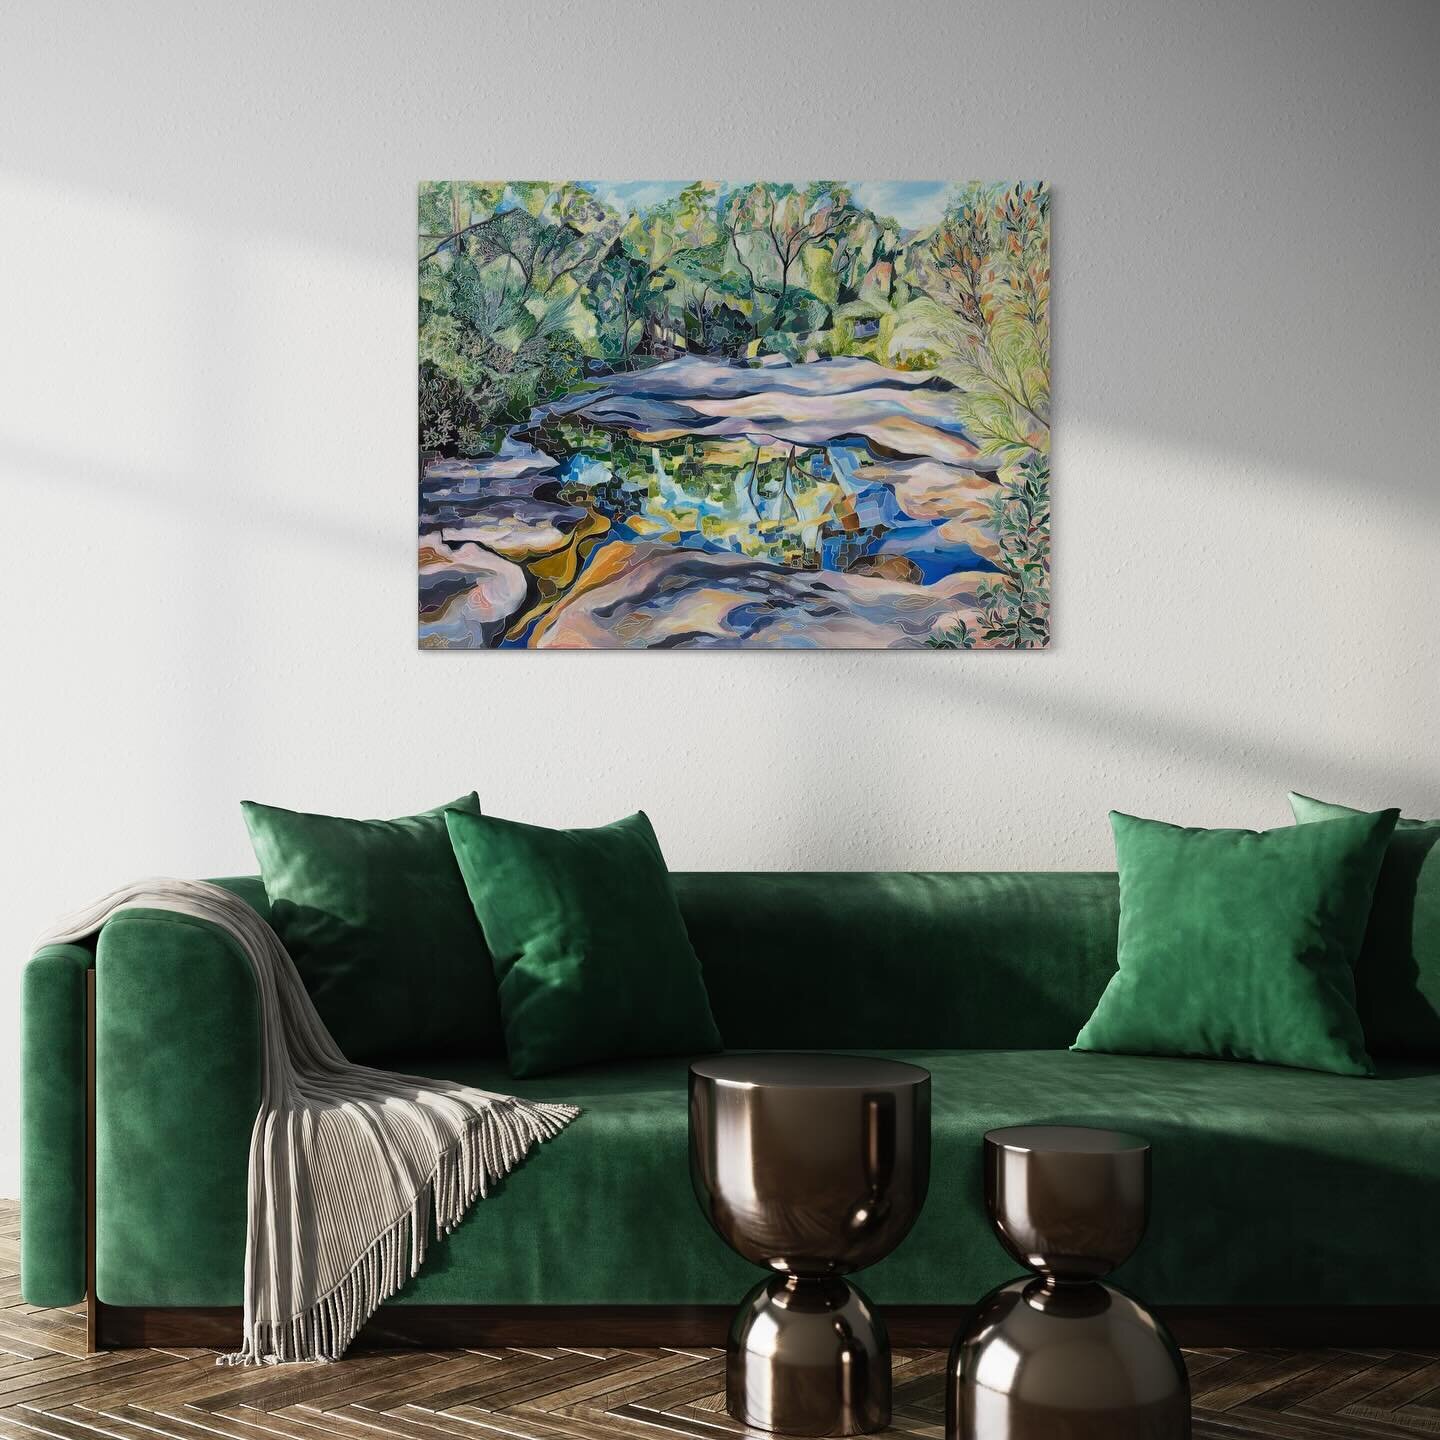 Cool creeks- swim amongst nature&hellip; in your living room&hellip;. 

This original oil carving on wooden panel is currently available @bellingengallery 

Prints available in the link on my bio or website http://www.cocoelder.com.au/

#fineart #fin